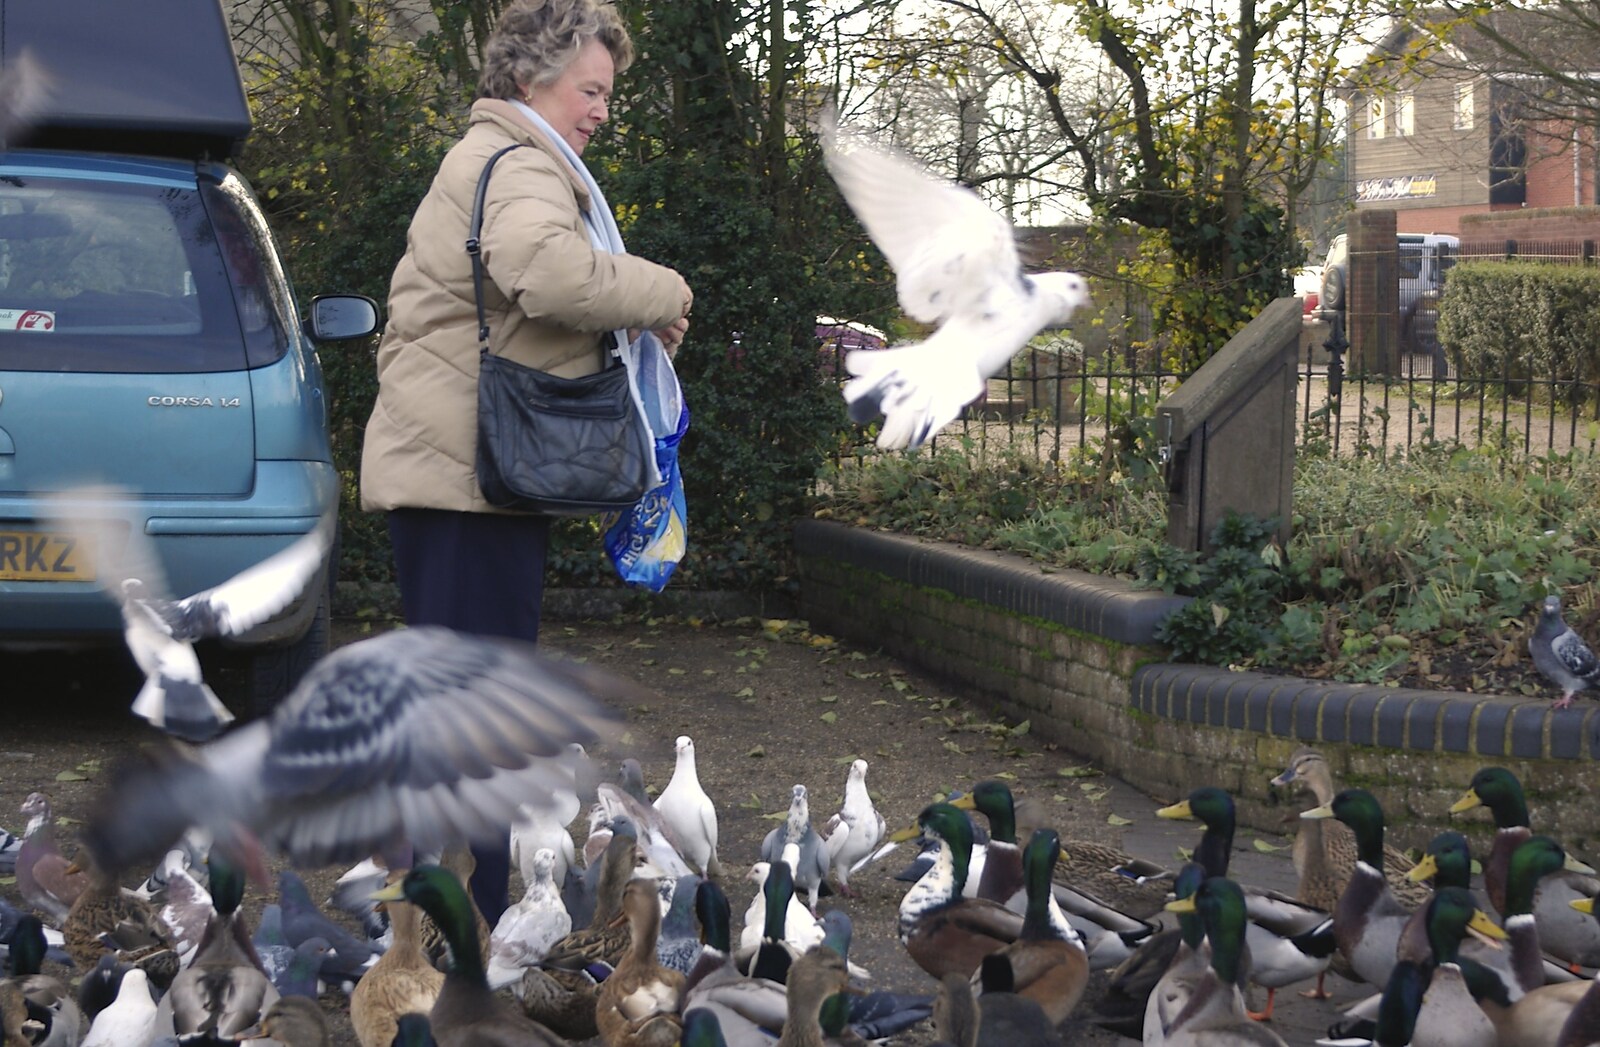 A woman wades through the birds from Random Scenes of Diss, Norfolk - 20th November 2004